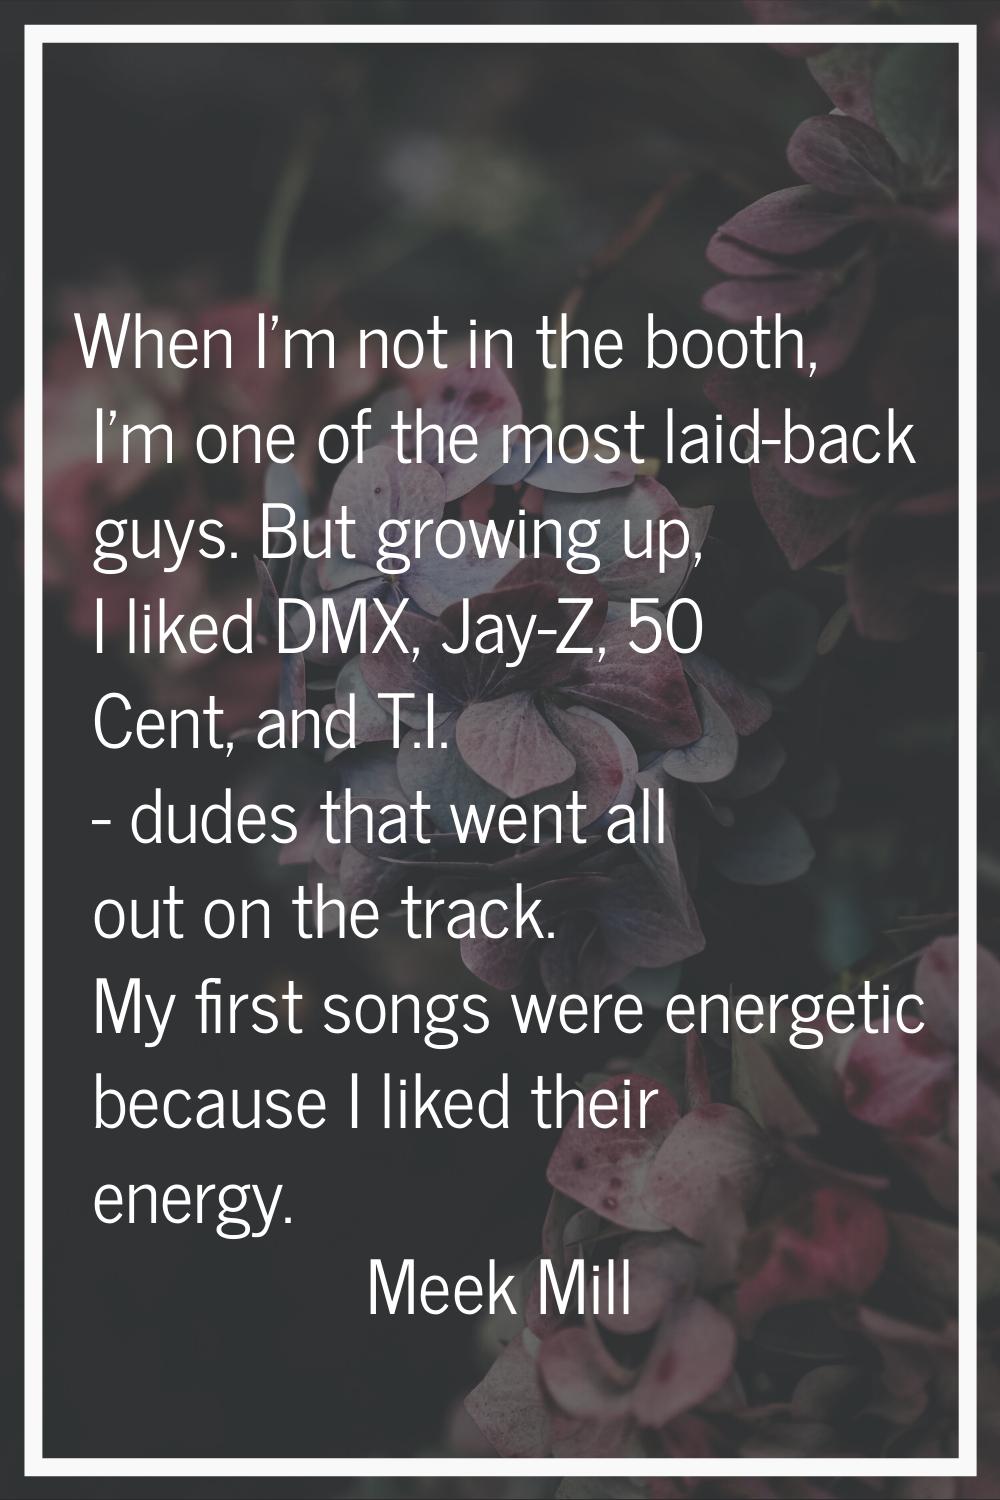 When I'm not in the booth, I'm one of the most laid-back guys. But growing up, I liked DMX, Jay-Z, 